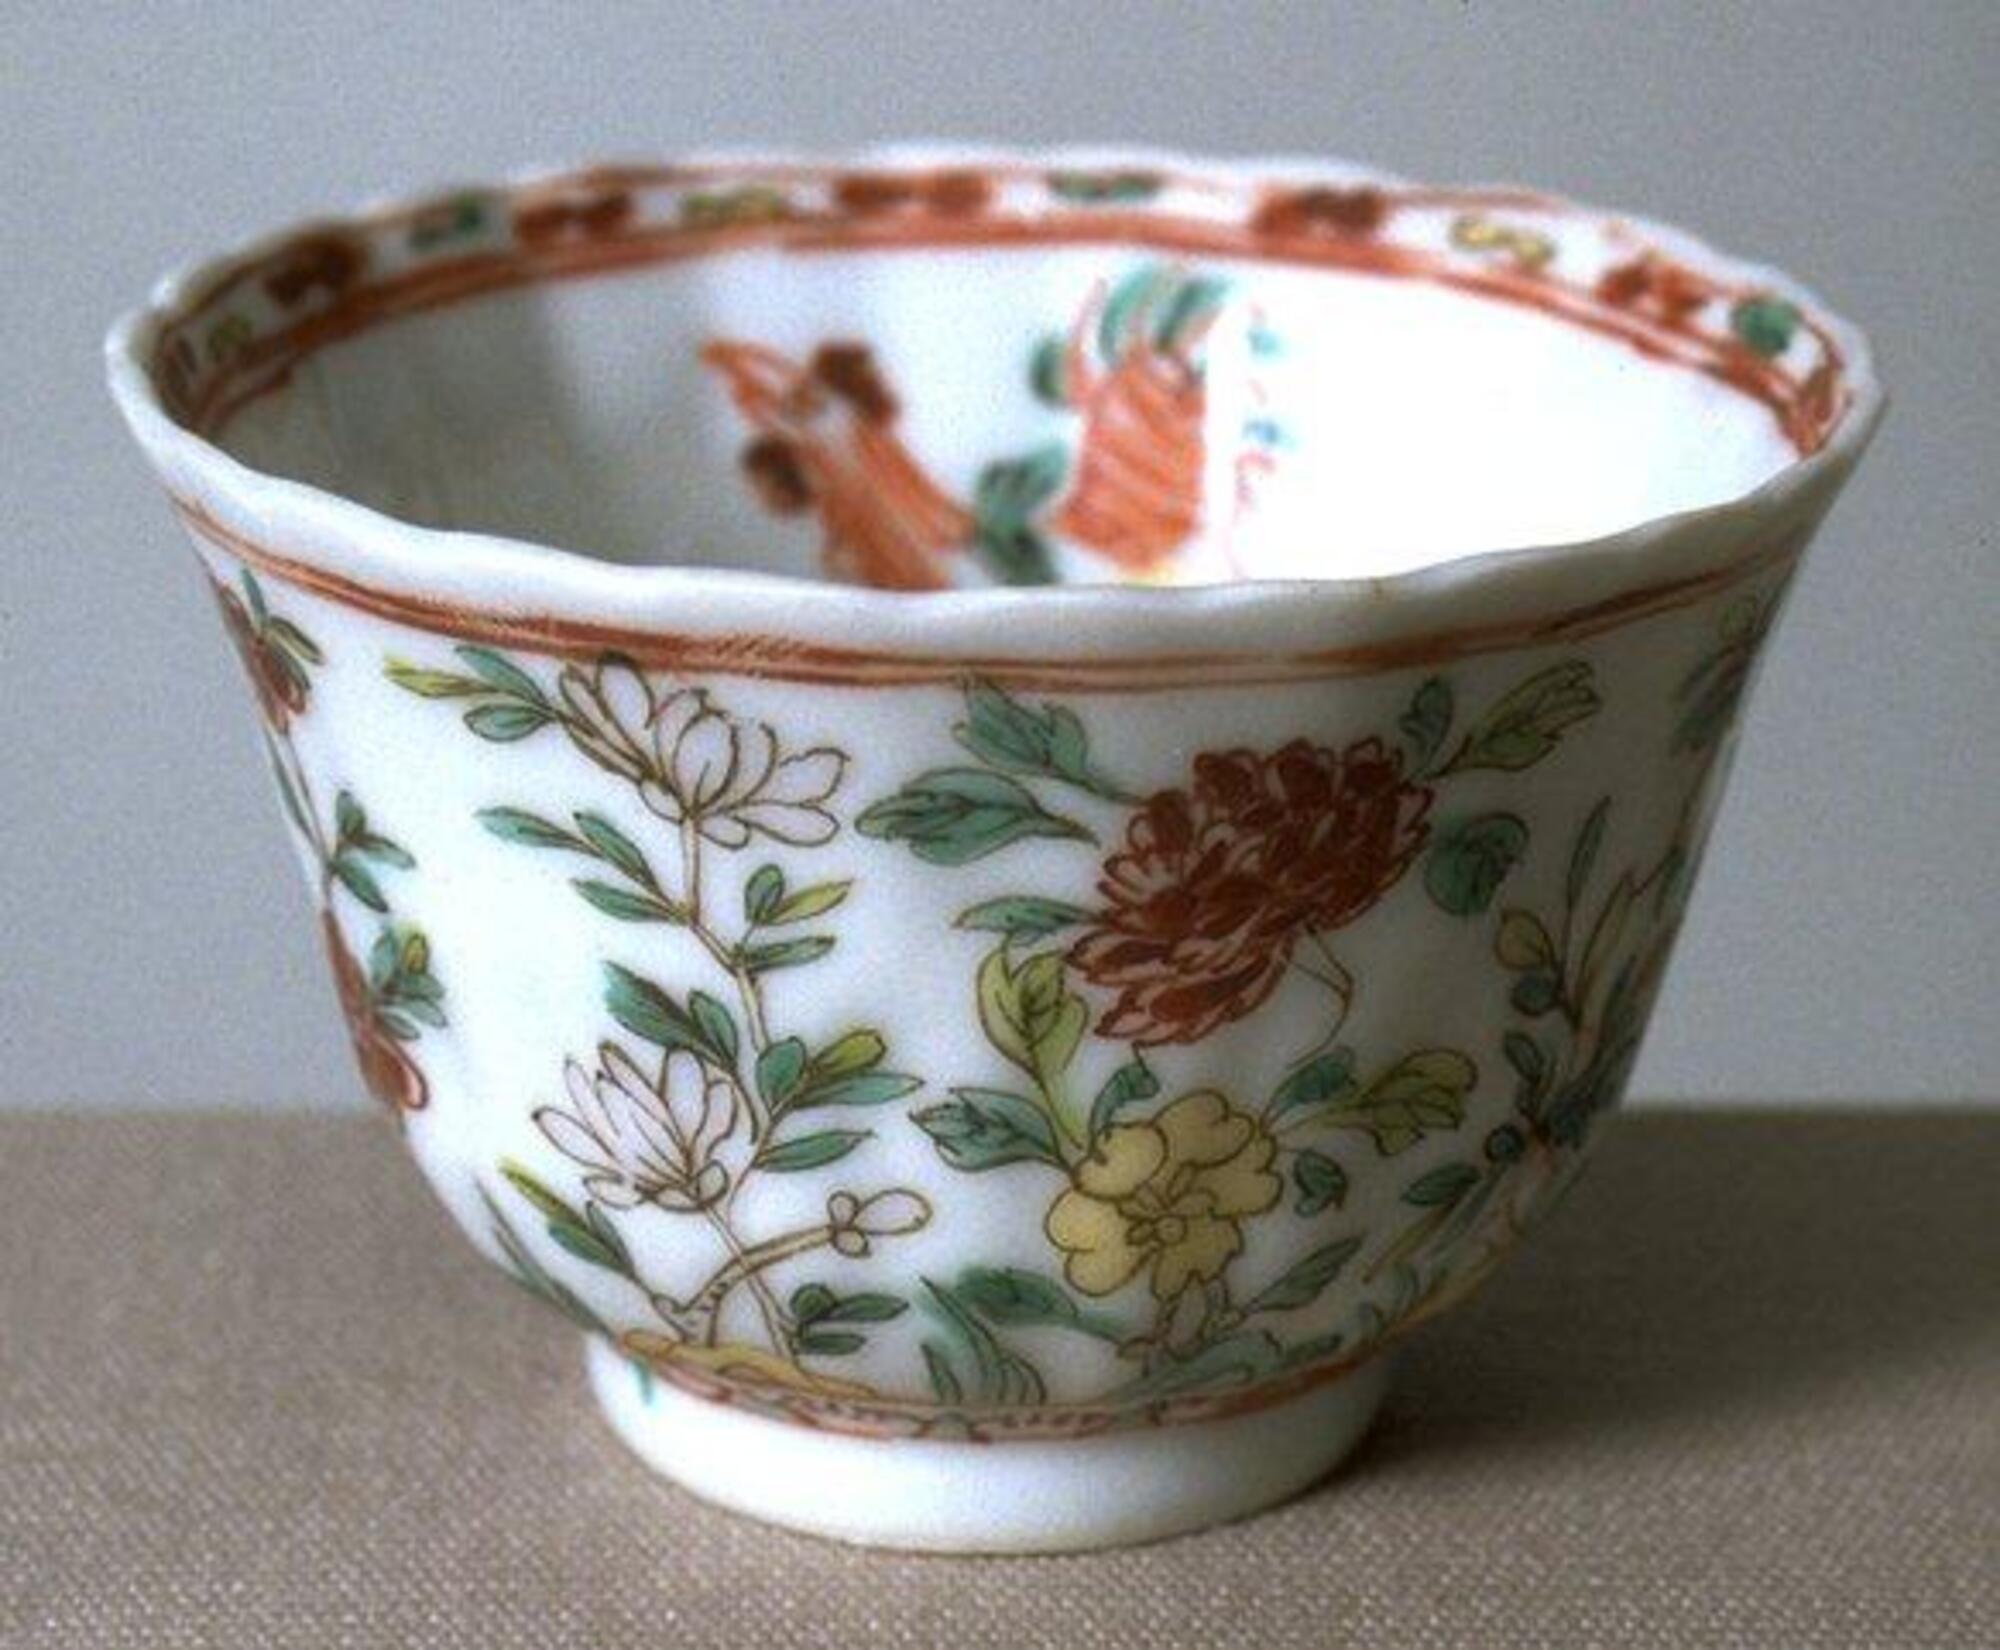 This bowl flares out by having a smaller diameter on the bottom and larger diameter along the rim. The outside of the bowl is decorated with red, pink, and yellow peonies with green leaves. The inside of the bowl is decorated with a red rooster. The outside rim of the bowl has two red horizontal stripes, the top rim of the bowl is wavy with many bumps that resemble flower petals, the inside rim is decorated with more peonies. The foot of the bowl it tall.